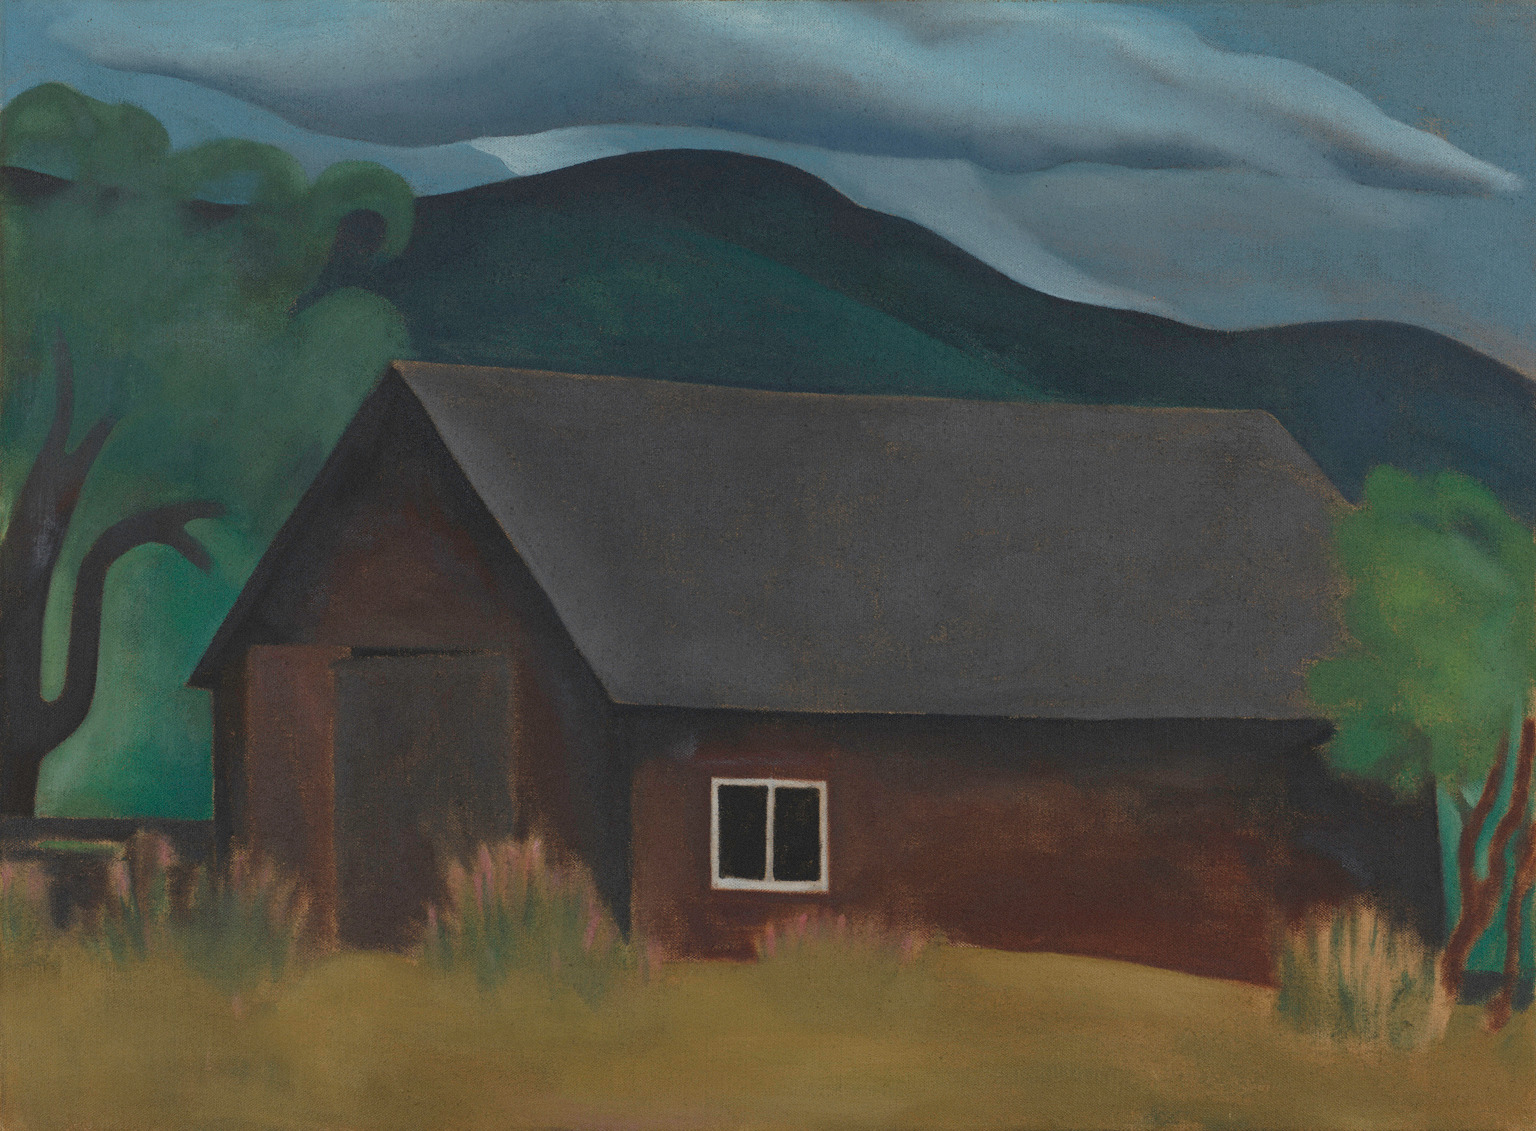 Georgia O'Keeffe. My Shanty, Lake George. 1922. Source: The Phillips Collection